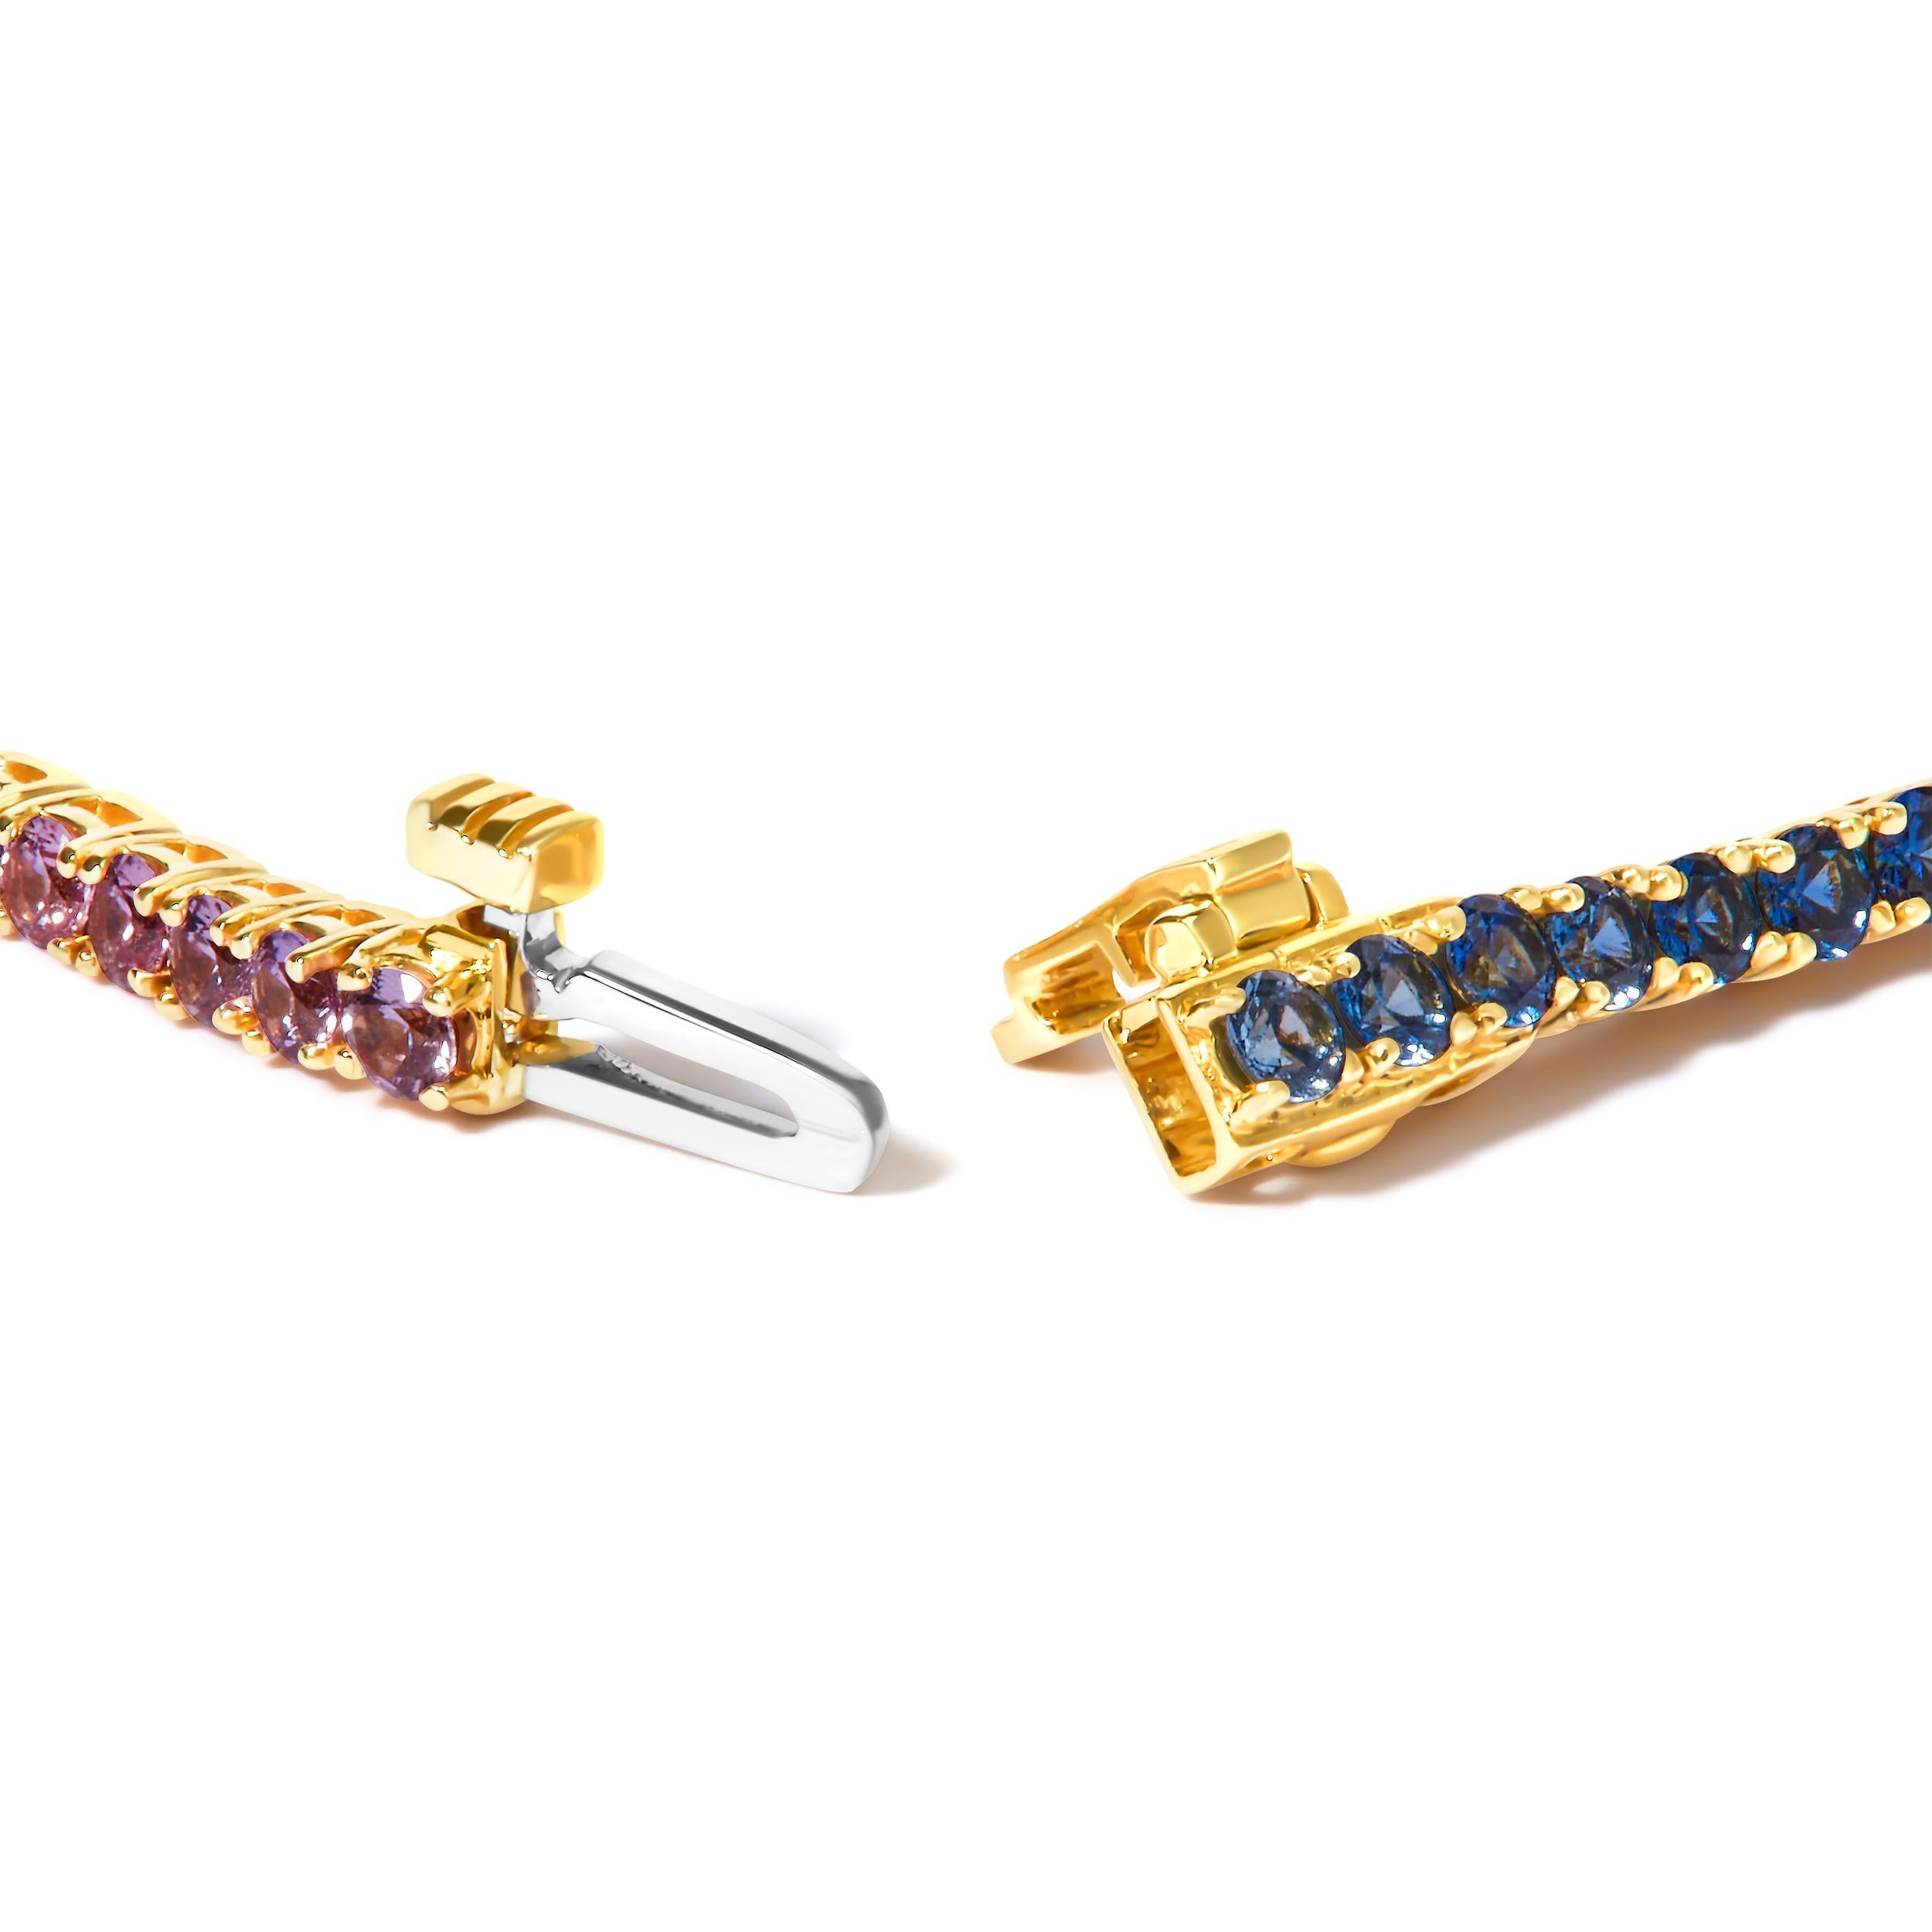 Immerse yourself in a kaleidoscope of color with our Natural Rainbow Gemstone Tennis Bracelet, crafted from exquisite 14K yellow gold. Adorned with 13 natural gemstones including blue, yellow, and pink sapphires, green tsavorites, and red garnets,